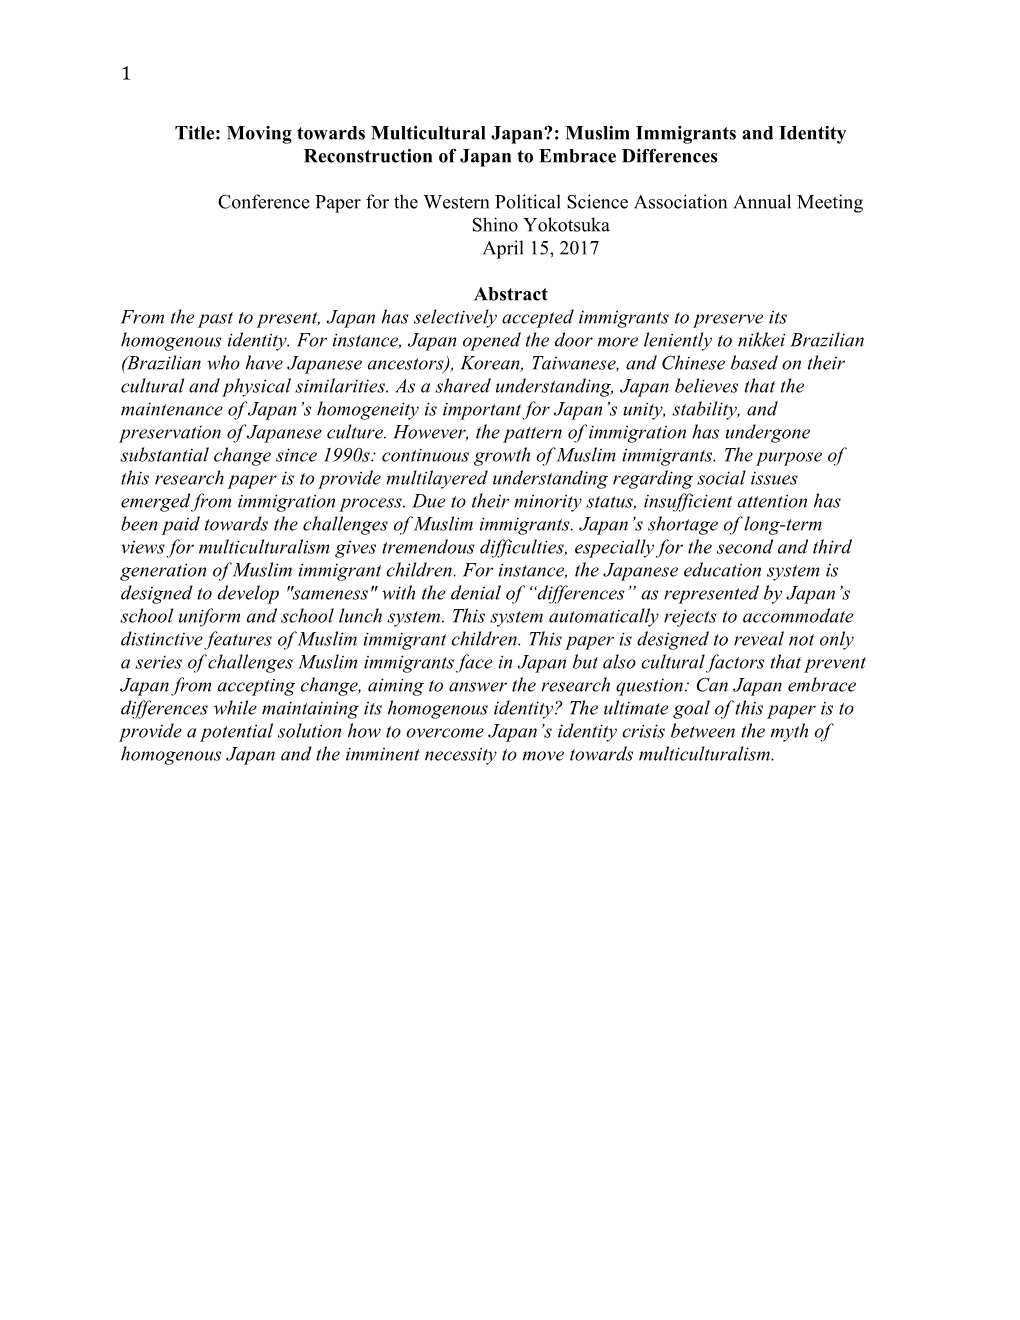 Title: Moving Towards Multicultural Japan?: Muslim Immigrants and Identity Reconstruction